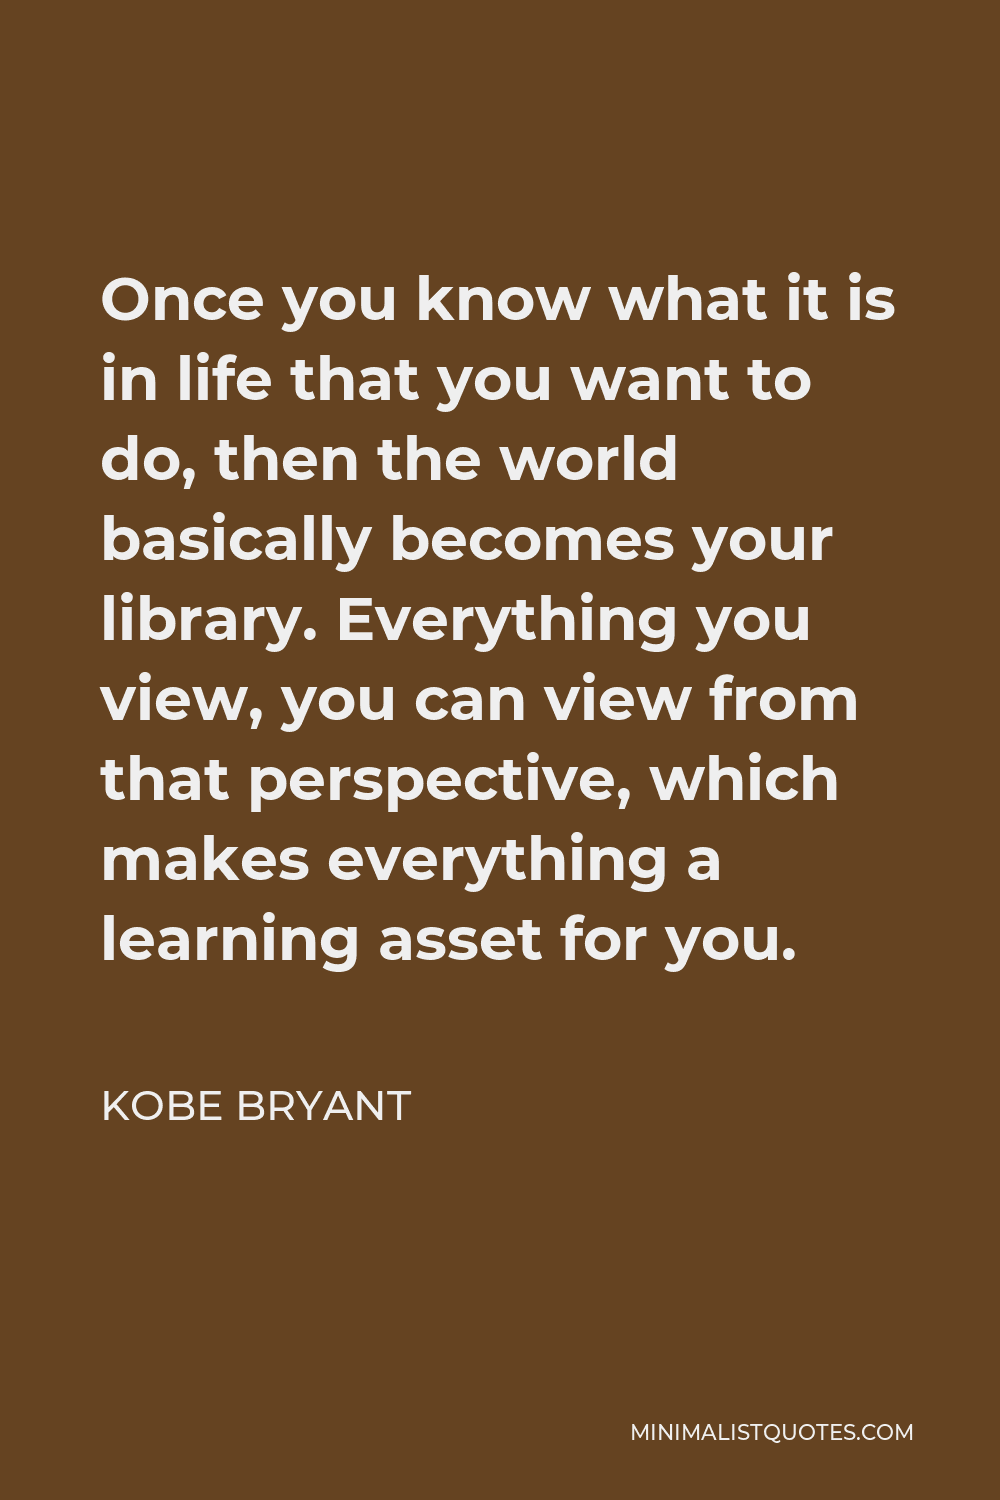 Kobe Bryant Quote - Once you know what it is in life that you want to do, then the world basically becomes your library. Everything you view, you can view from that perspective, which makes everything a learning asset for you.